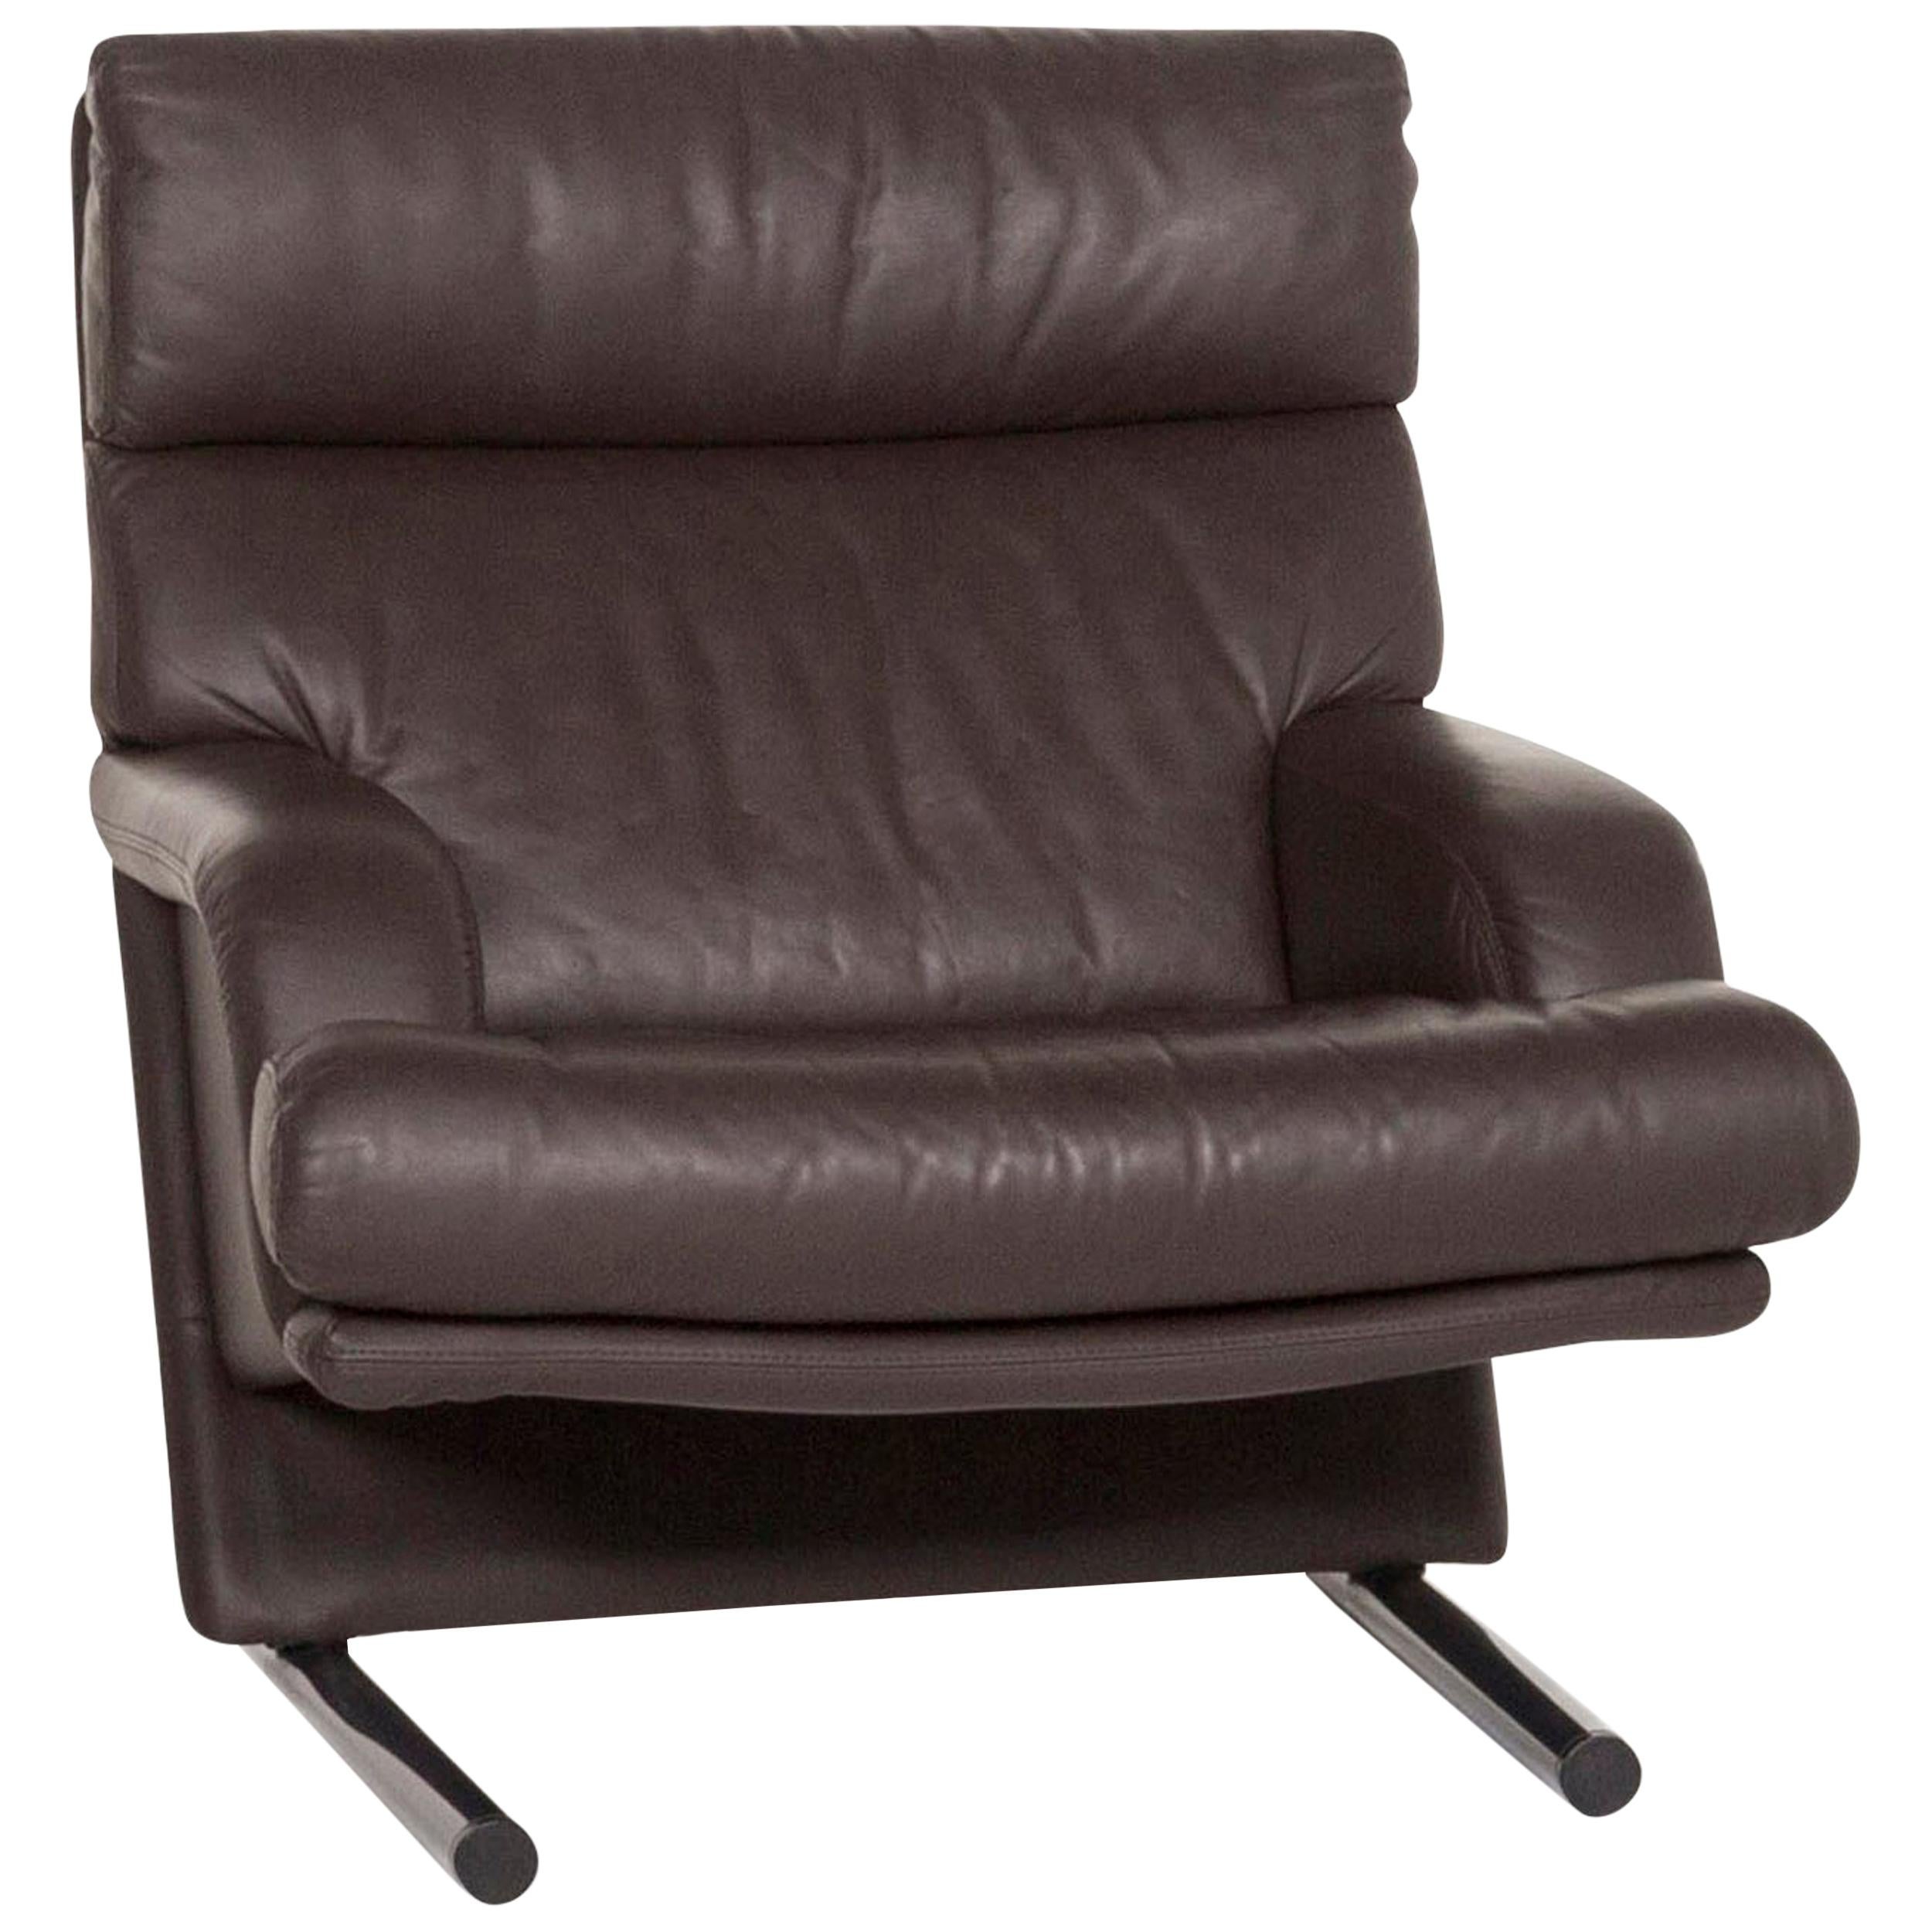 Rolf Benz Leather Armchair Brown Dark Brown Club Armchair For Sale